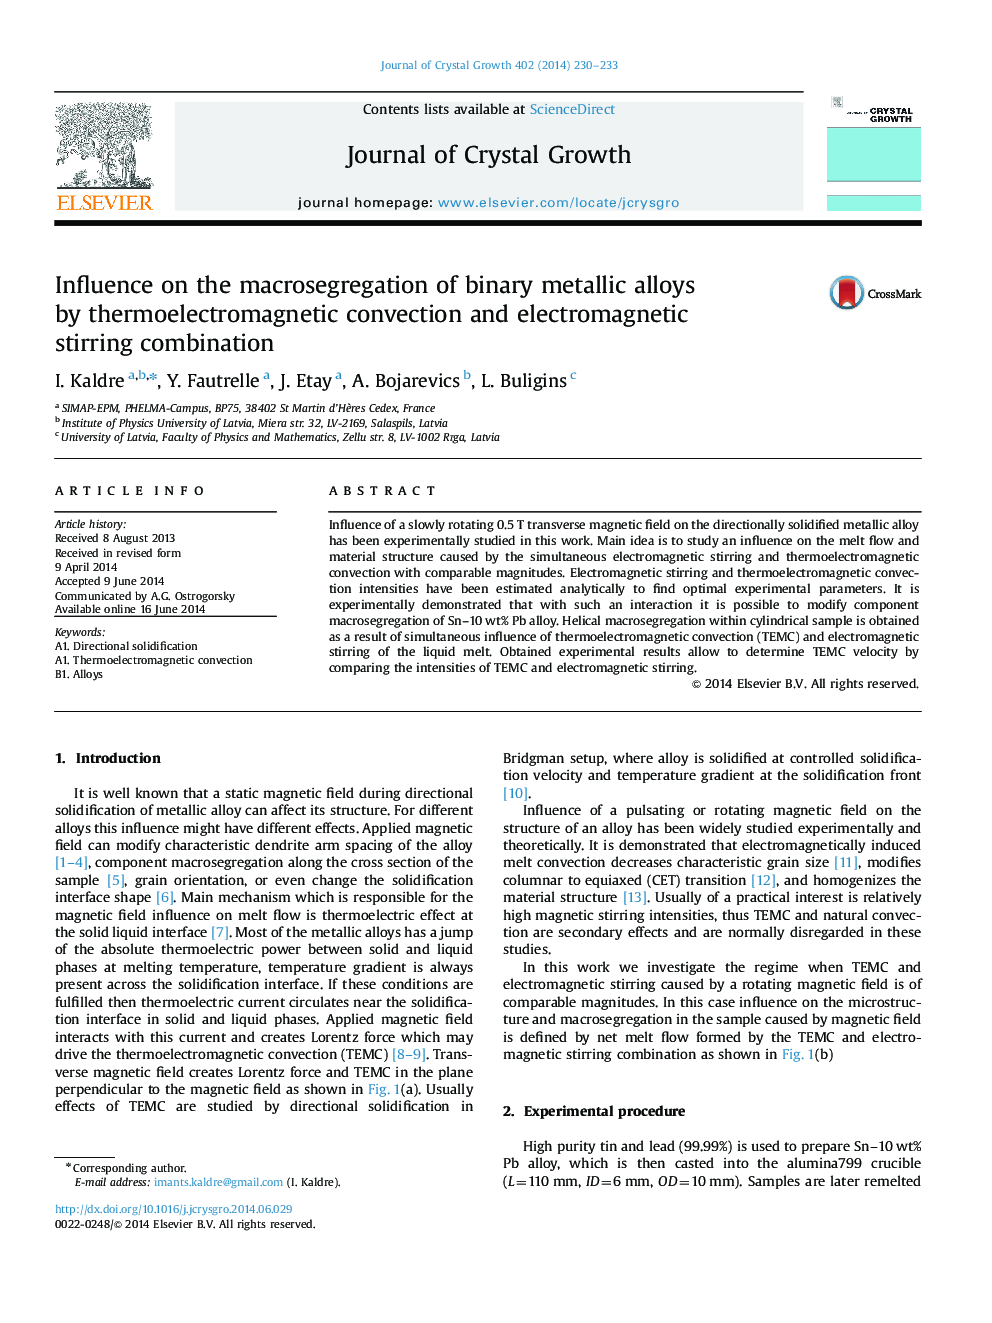 Influence on the macrosegregation of binary metallic alloys by thermoelectromagnetic convection and electromagnetic stirring combination